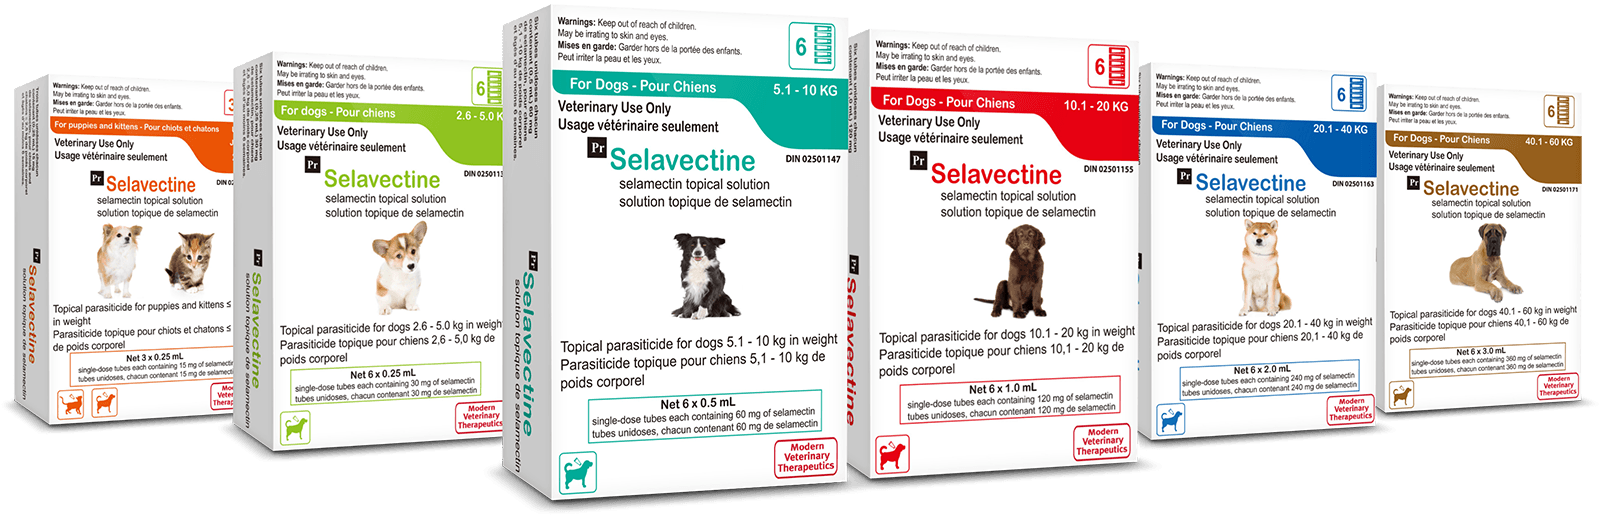 Selavectine Product Package Lineup